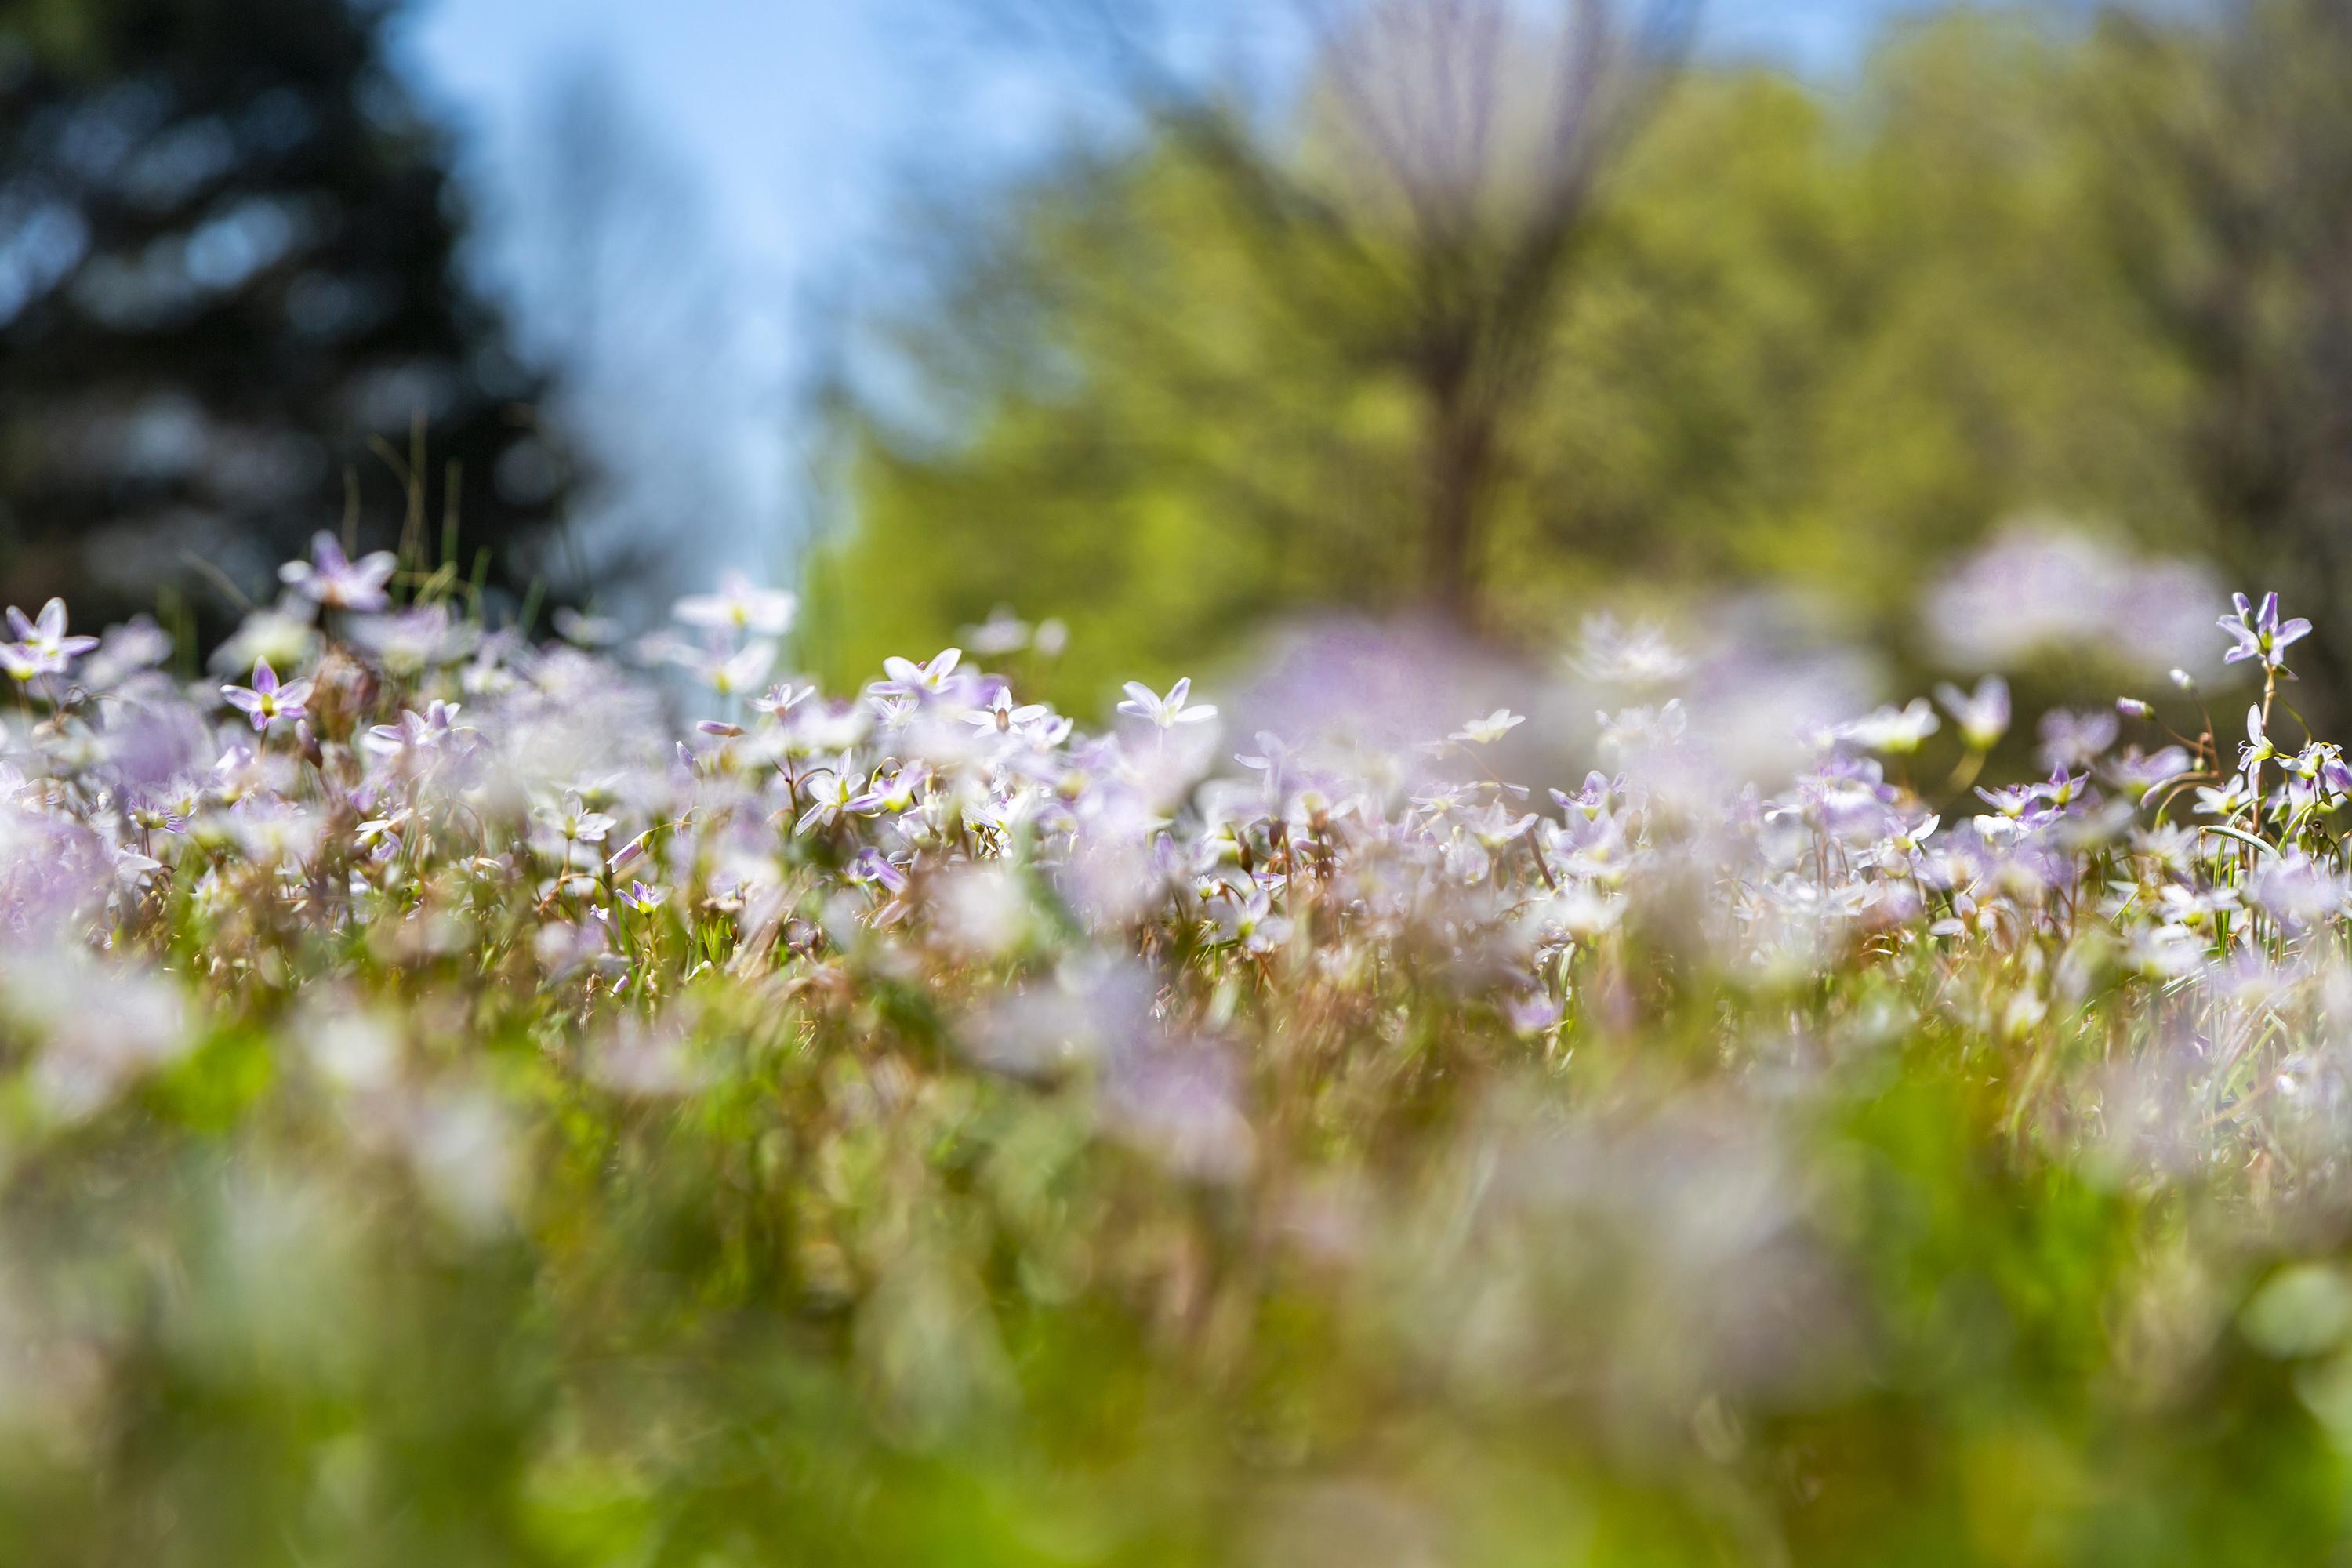 Thad Lee Landscape Photograph - 'The March of Spring Beauties' - abstract landscape photography - floral